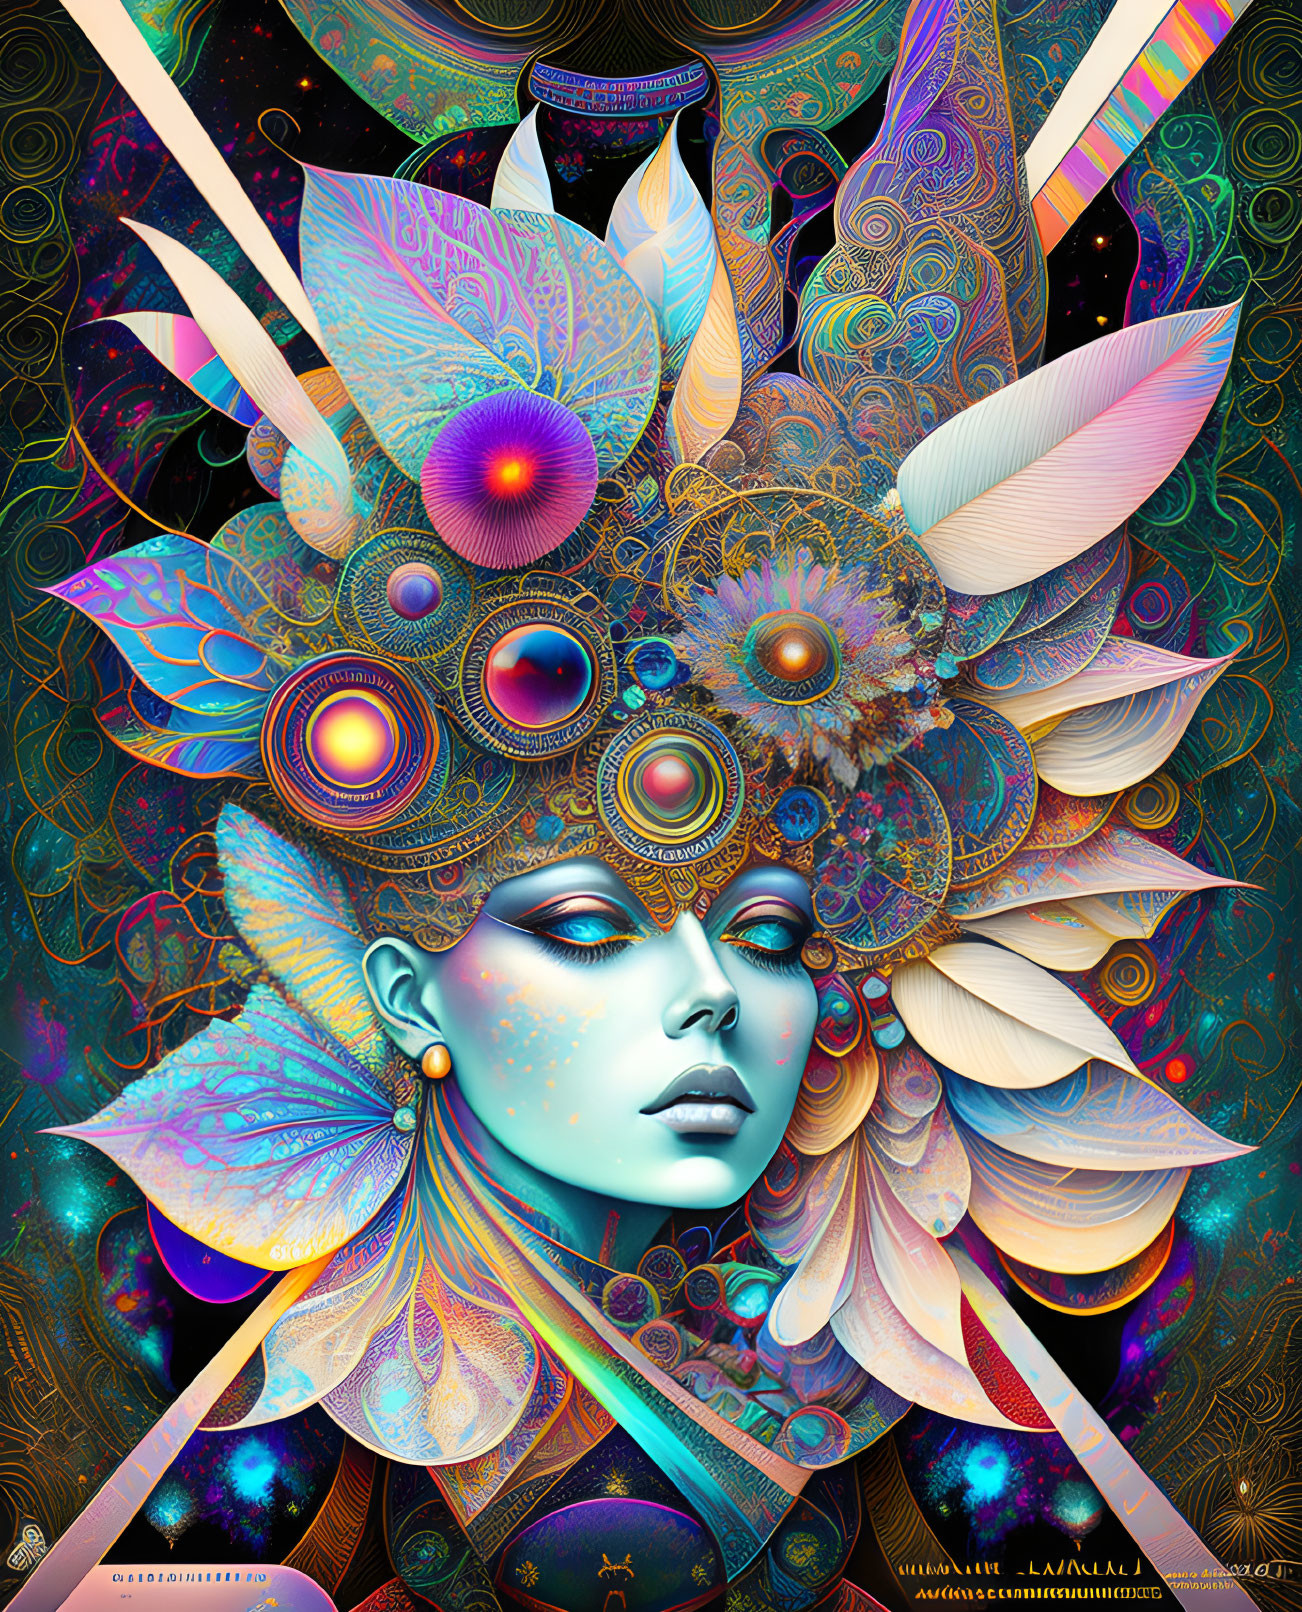 Colorful digital artwork of woman with cosmic floral headpiece